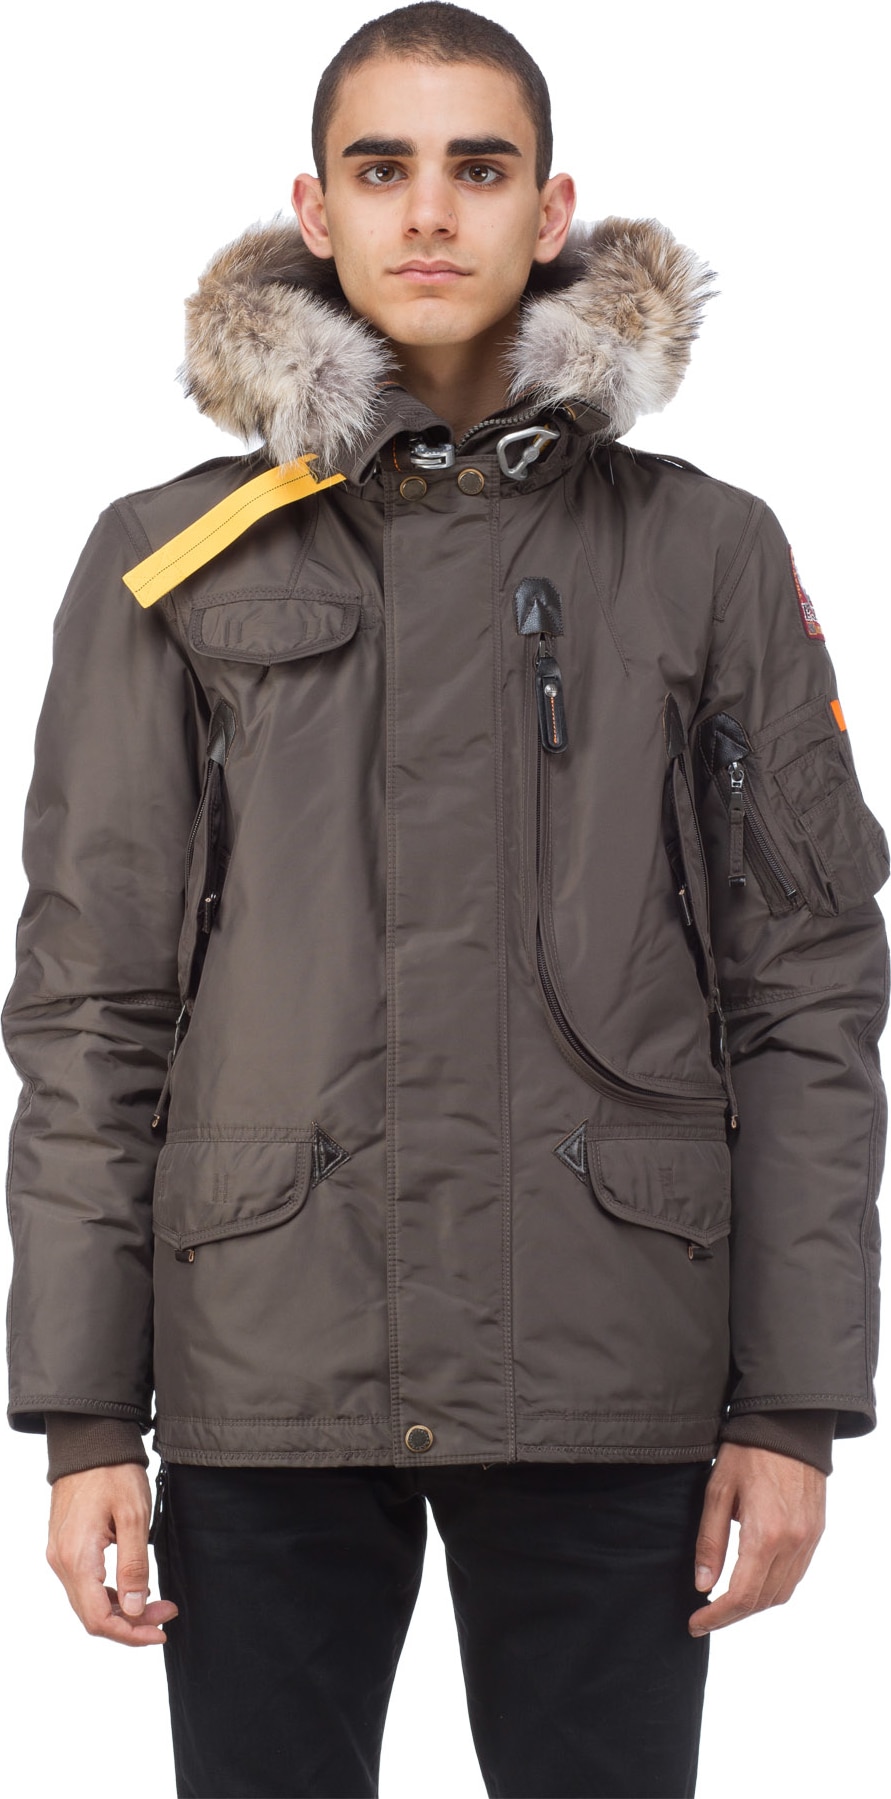 parajumpers right hand jacket men's